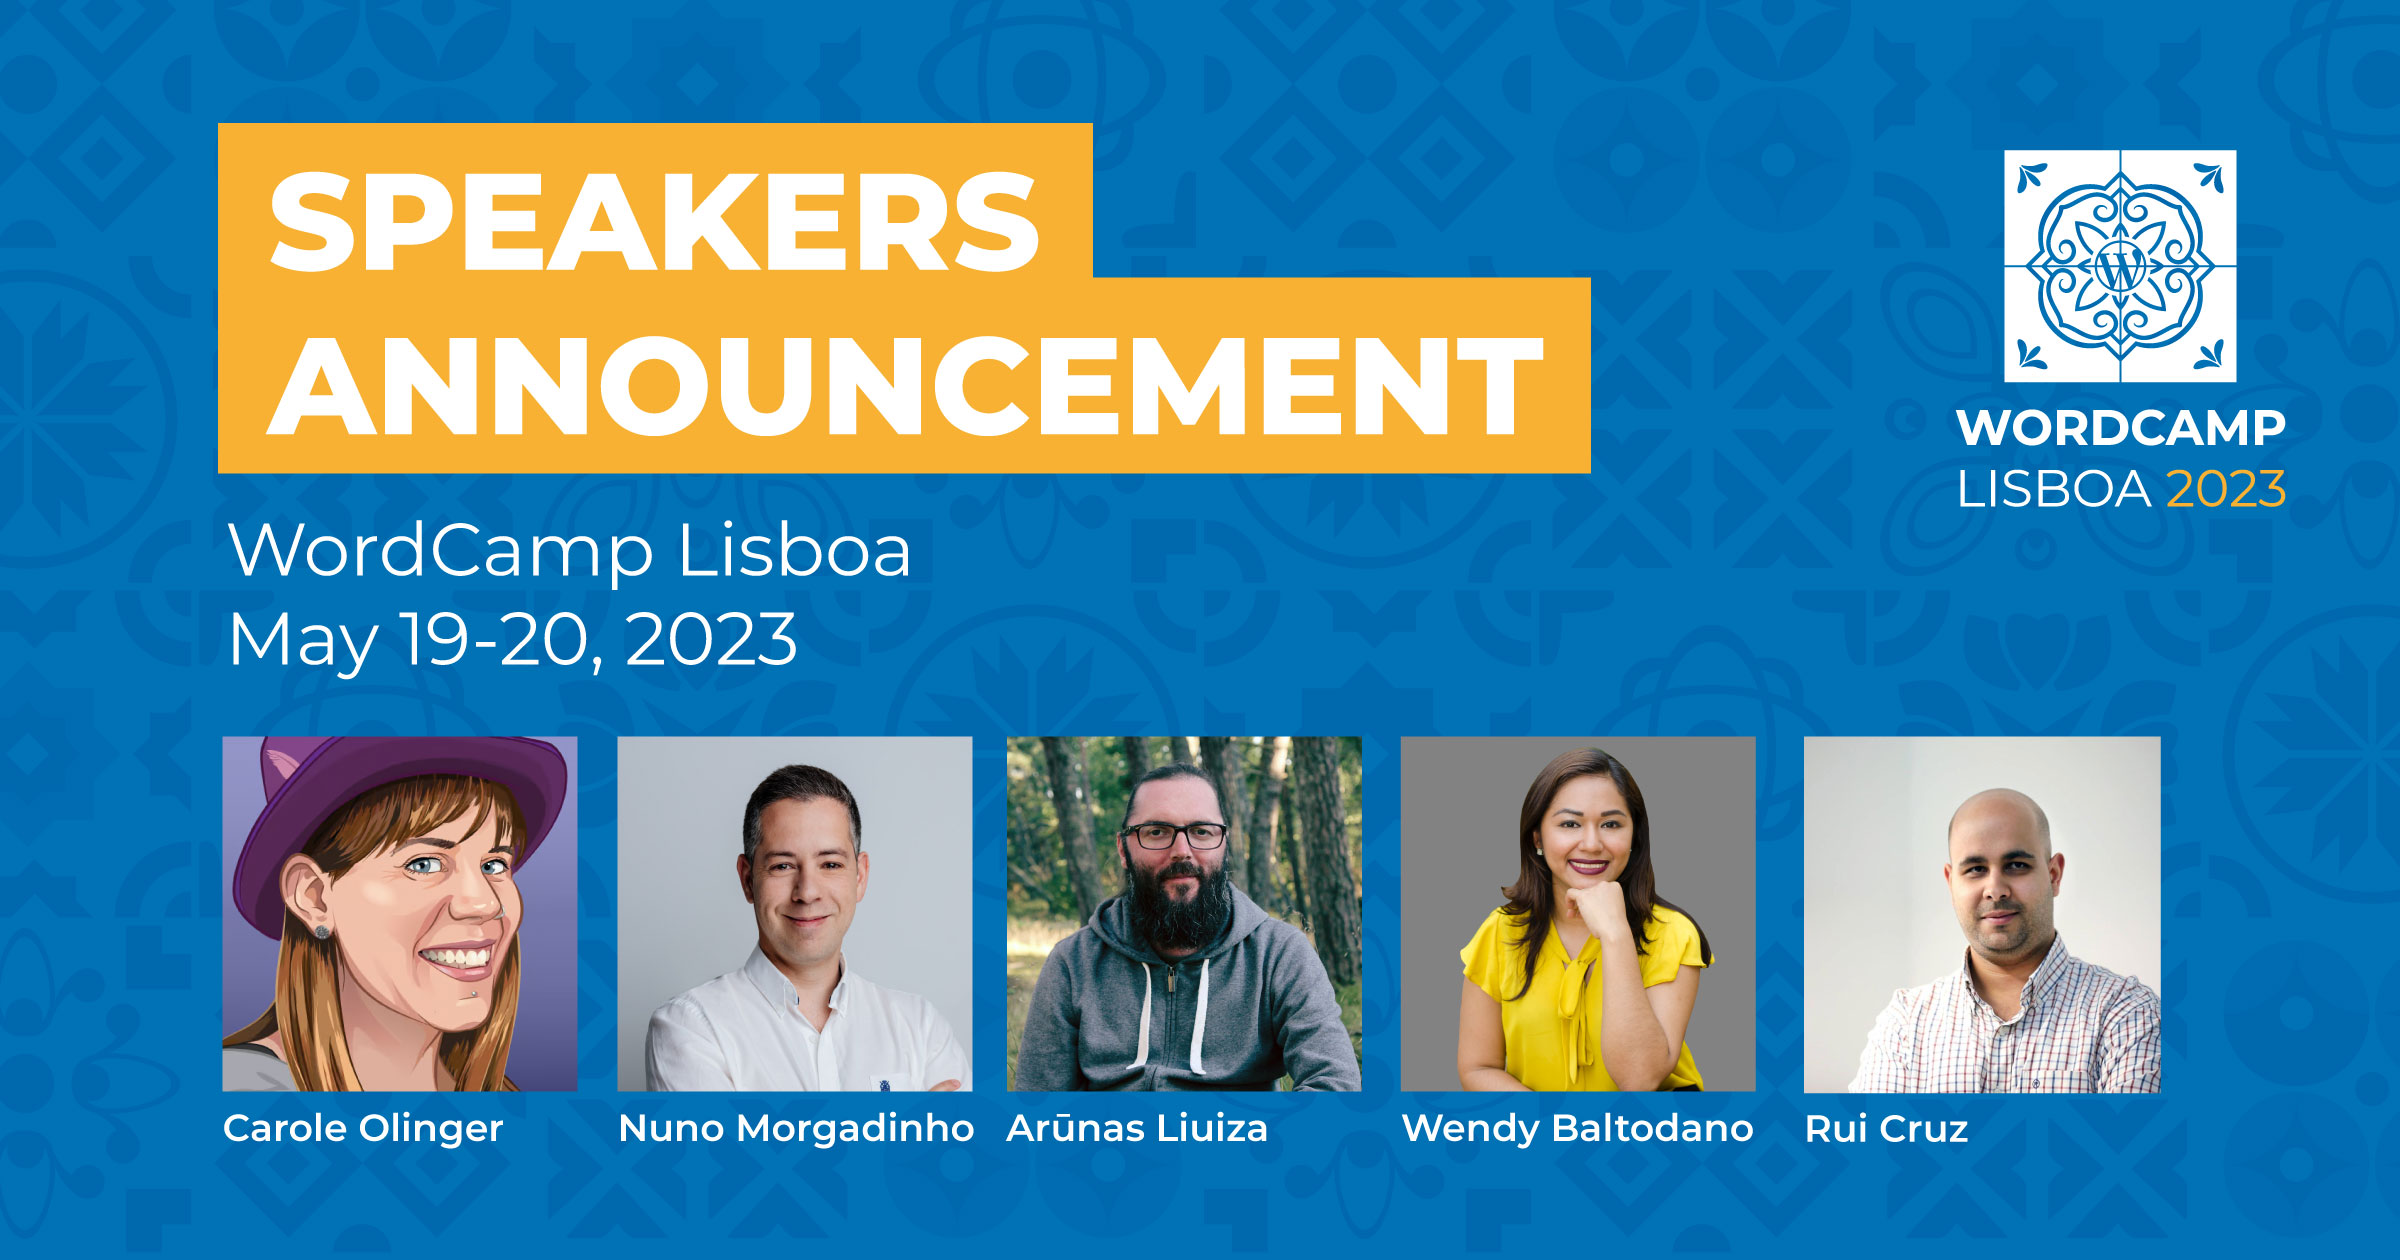 Third batch of speakers announced